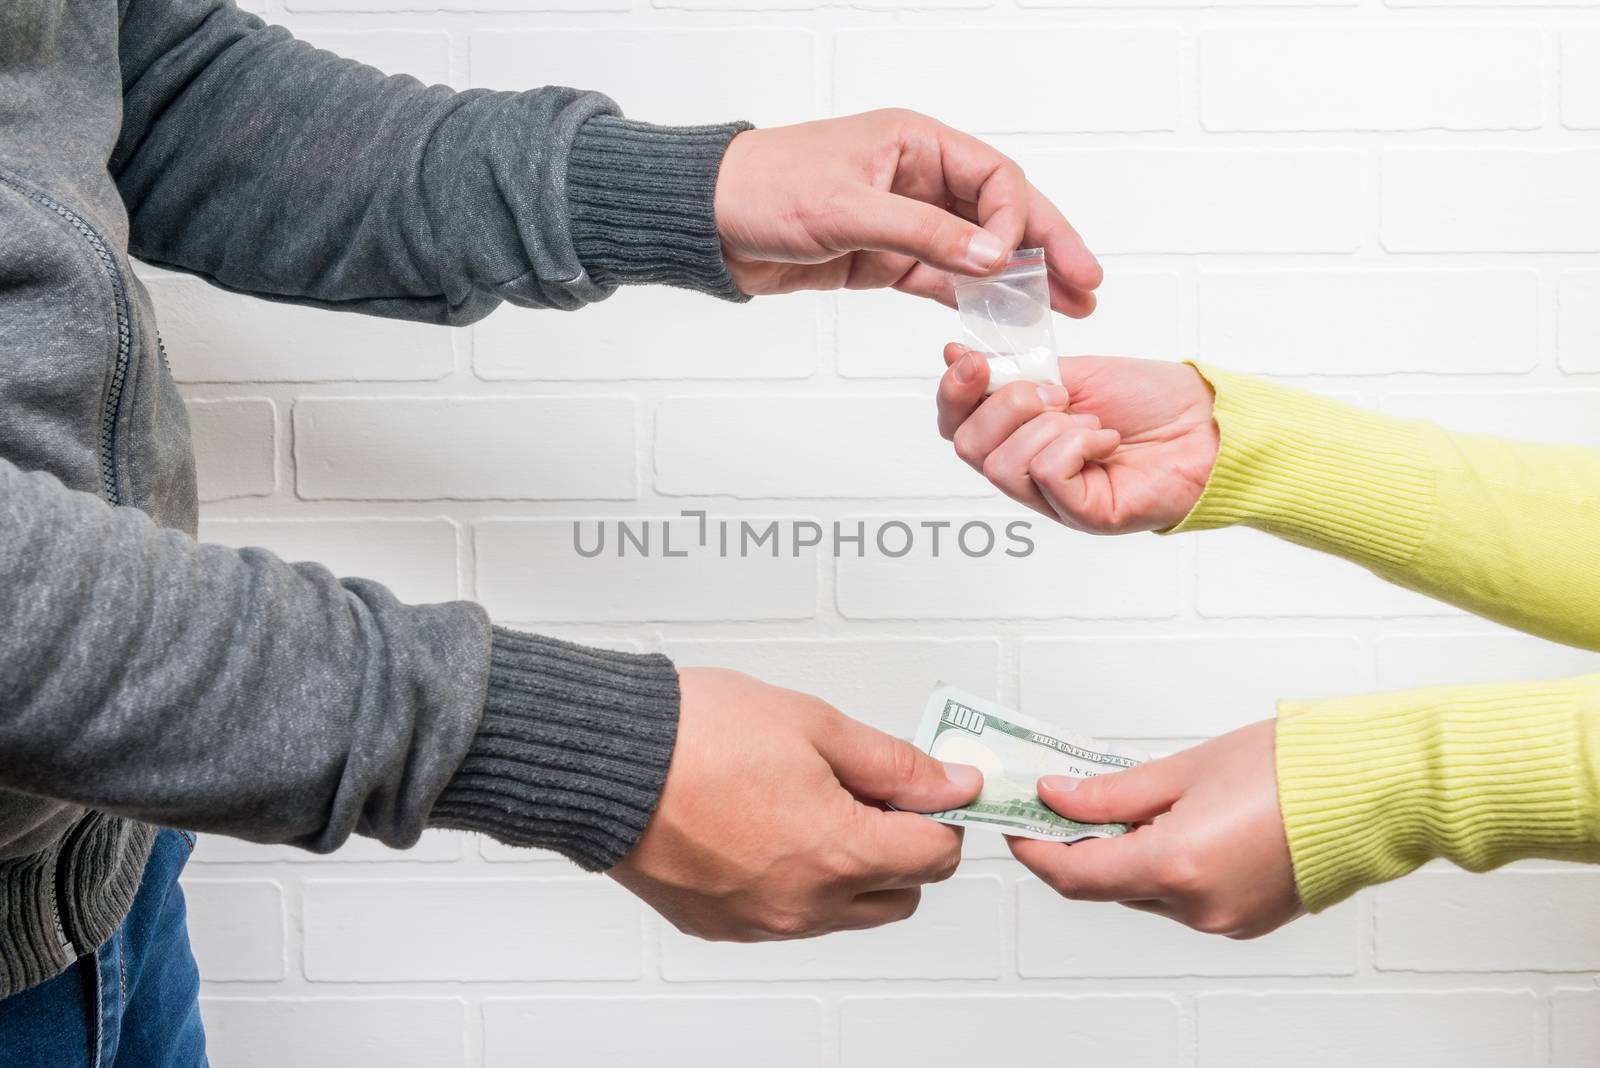 Woman drug addict buys drugs from a man, hands close-up